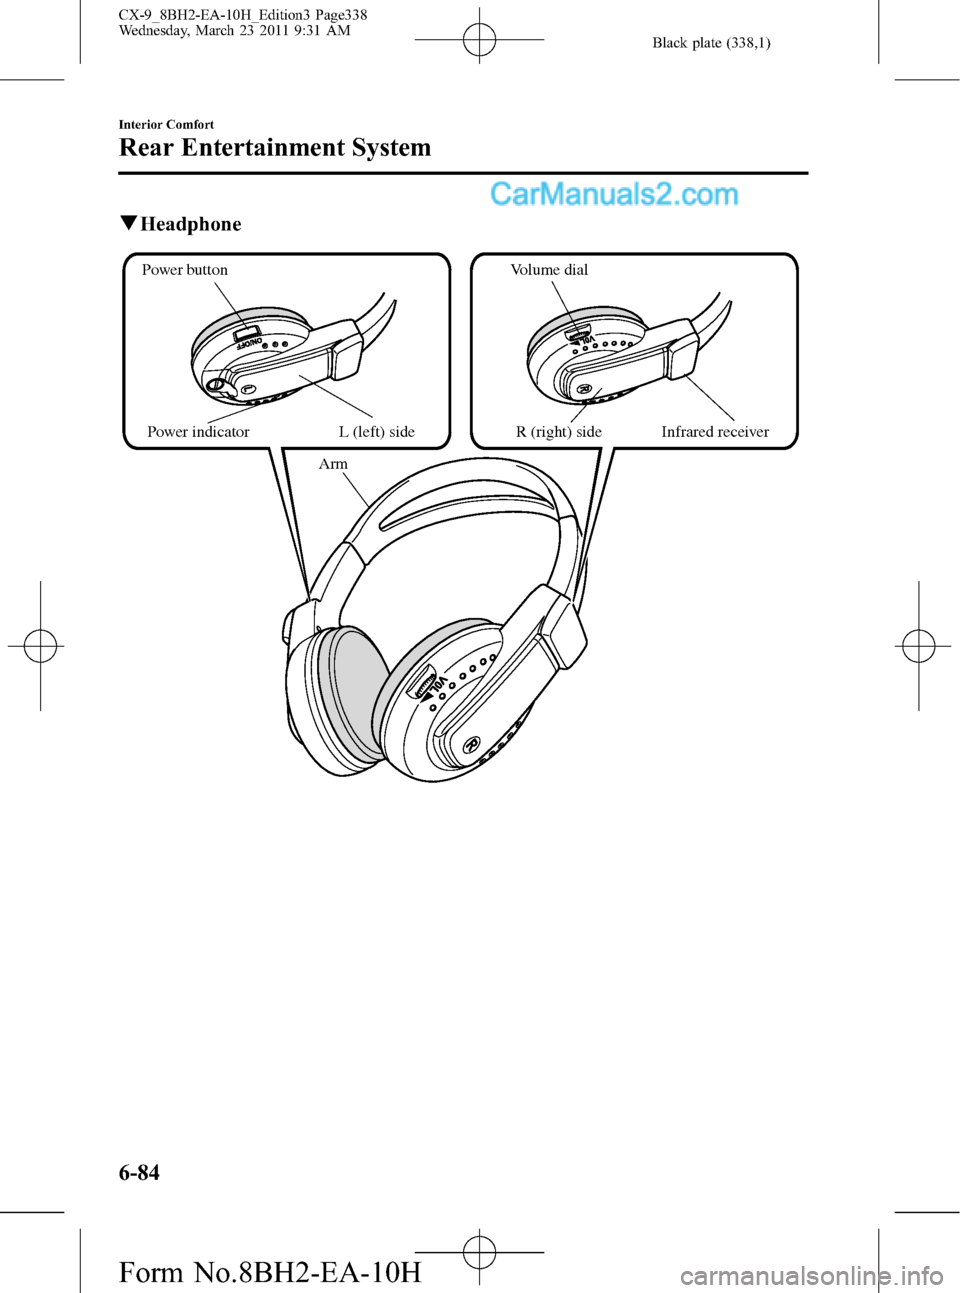 MAZDA MODEL CX-9 2011  Owners Manual (in English) Black plate (338,1)
qHeadphone
Arm
Volume dial
Infrared receiver R (right) sidePower button
Power indicator
L (left) side
6-84
Interior Comfort
Rear Entertainment System
CX-9_8BH2-EA-10H_Edition3 Page